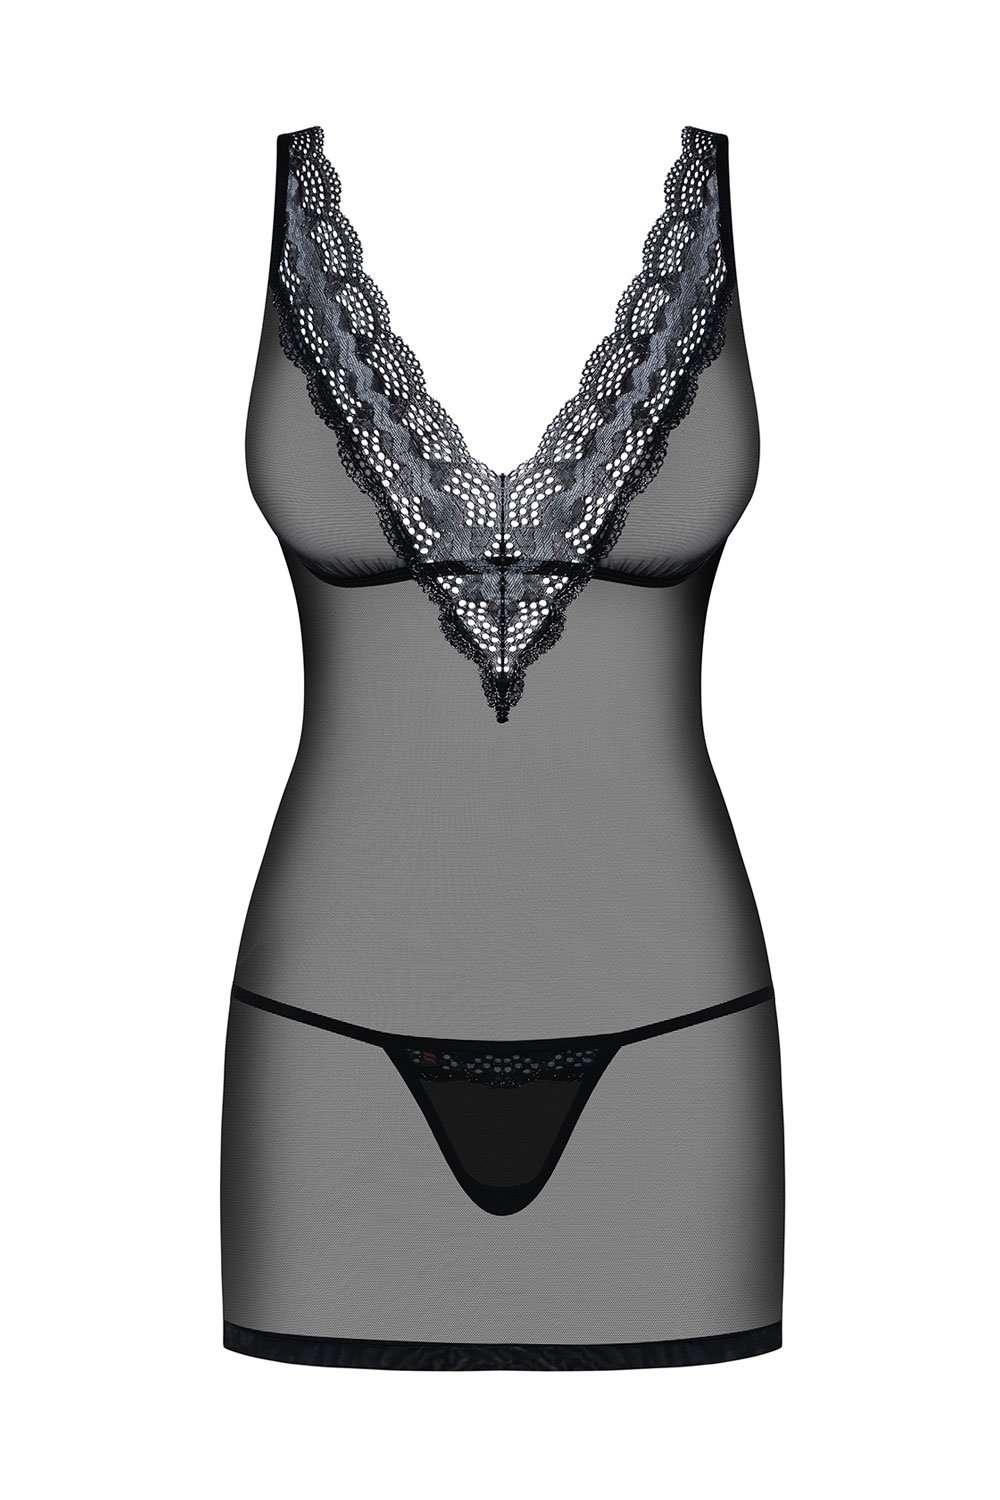 Obsessive Chemise & Thong With Geometric Lace, 869-CHE-1-L/XL, 869-CHE-1-S/M